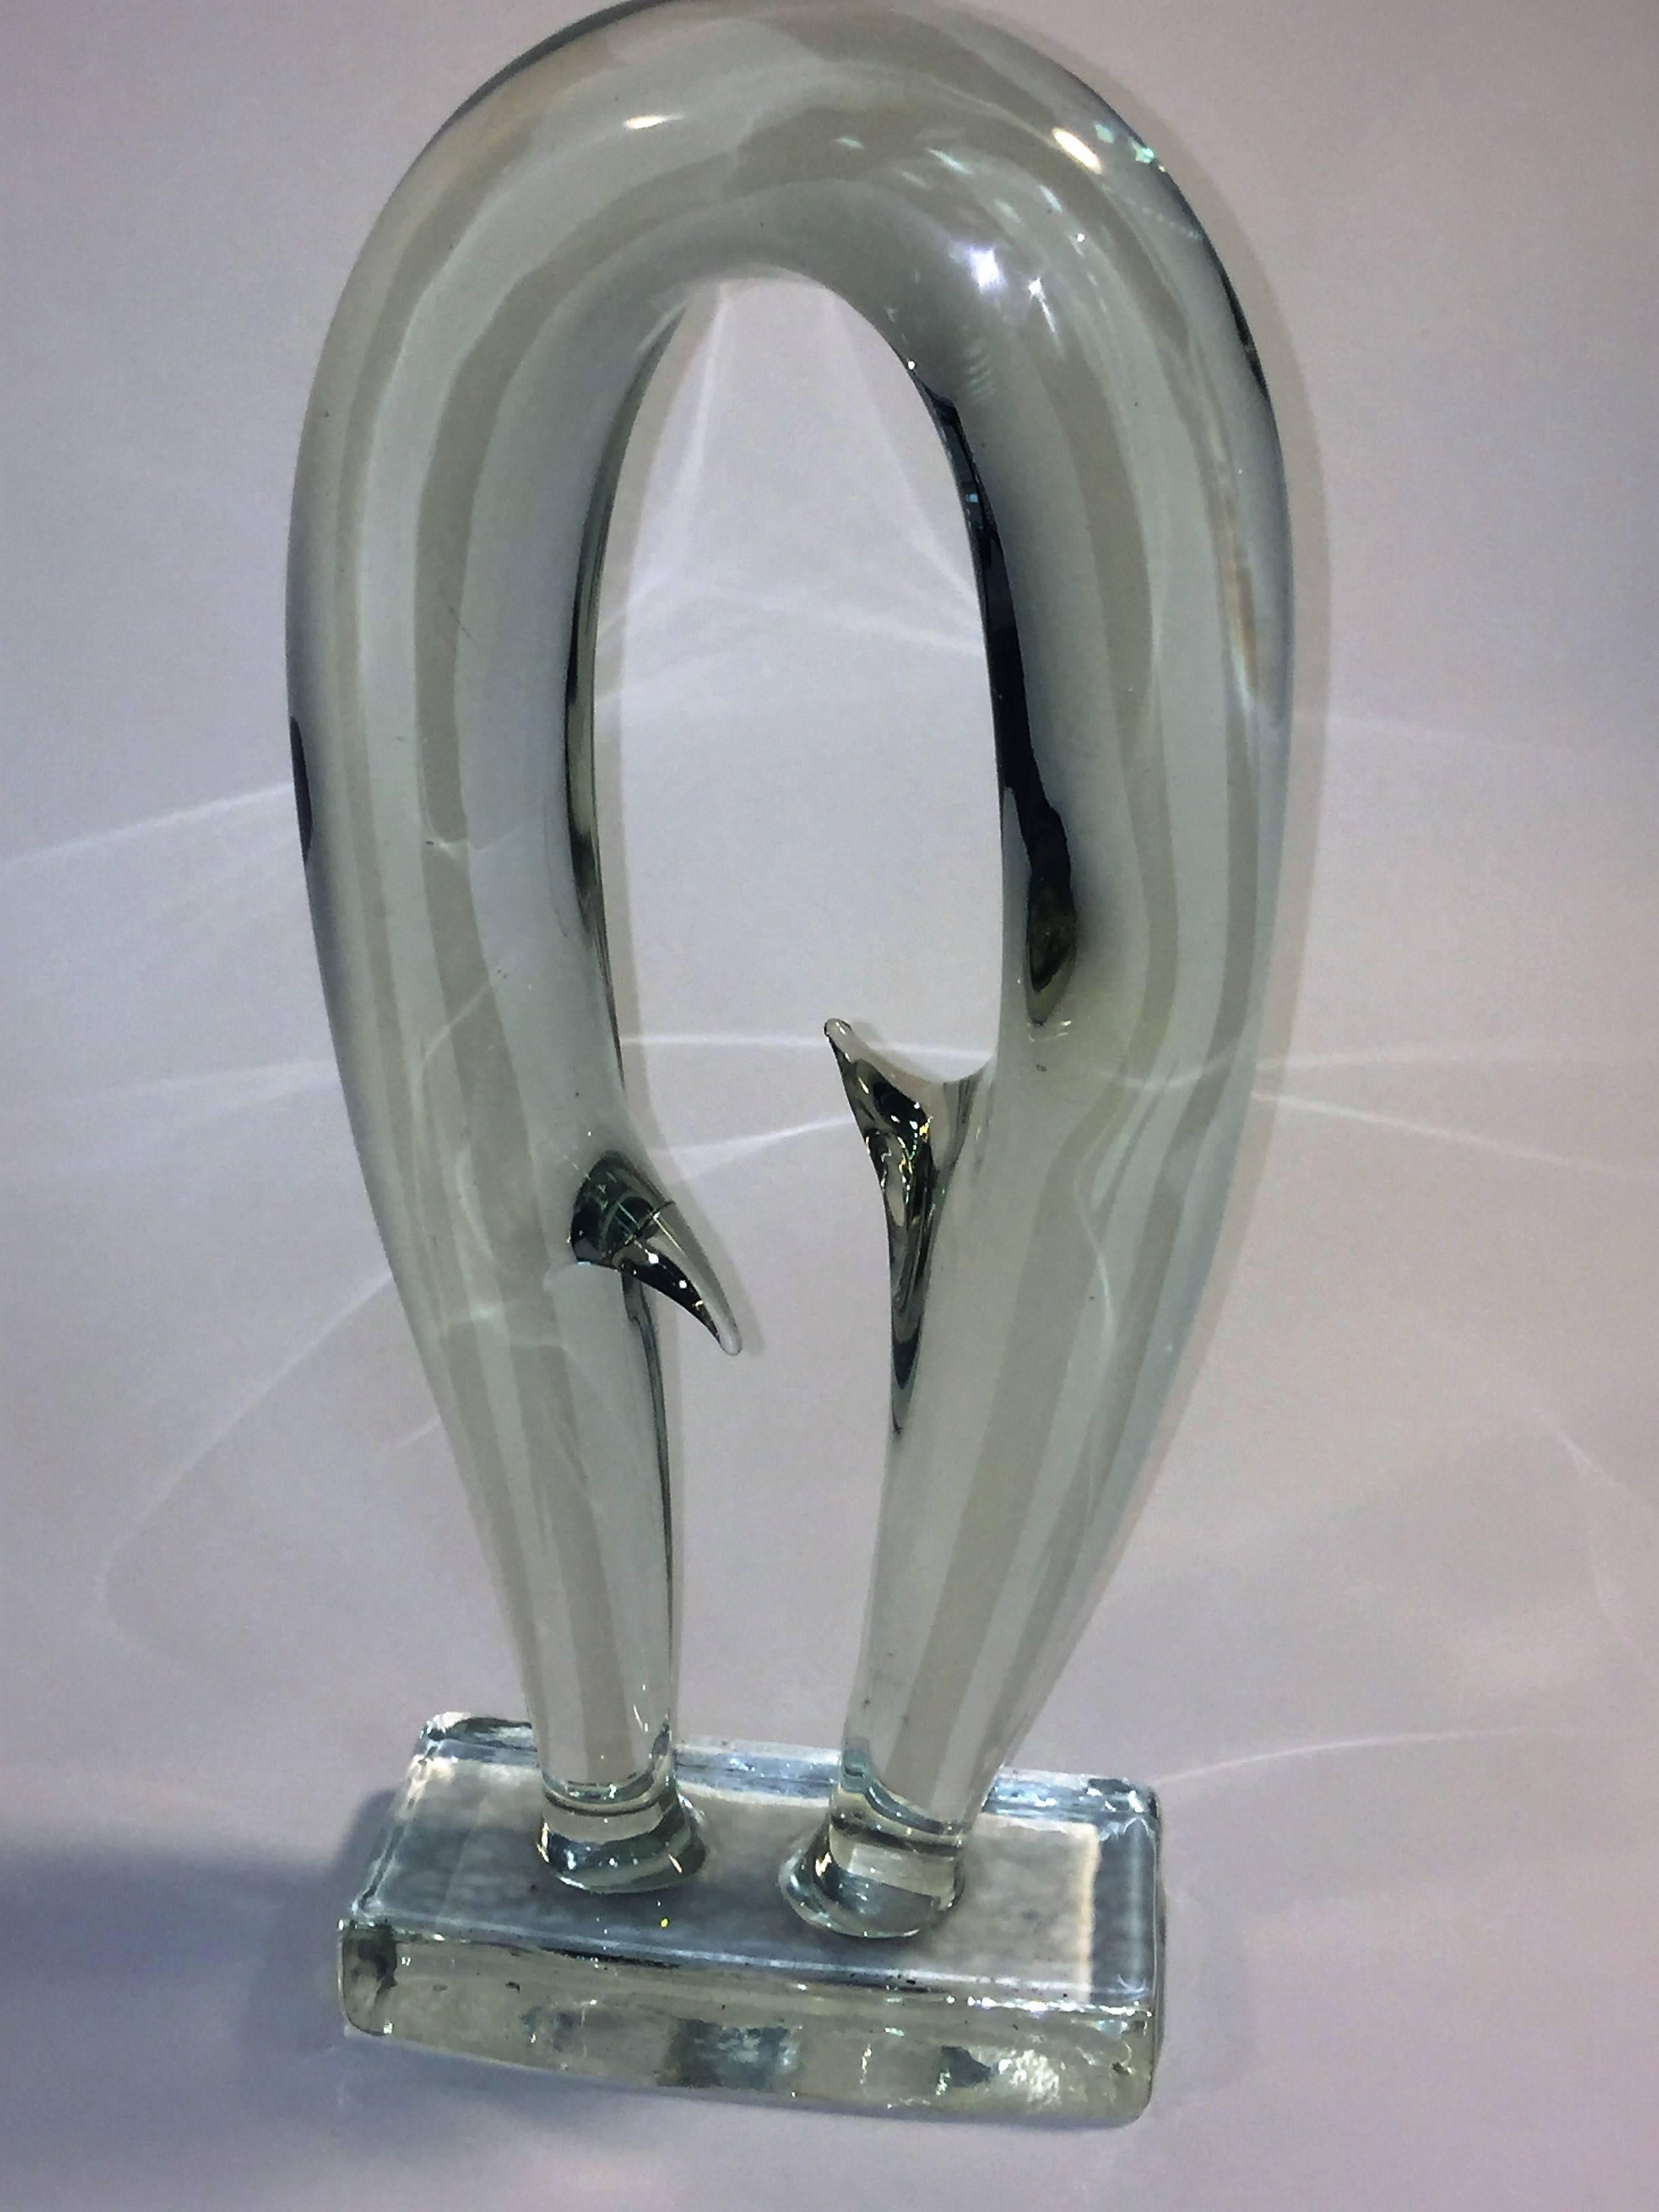 1970s curving form fluid clear Murano glass form by Seguso, interesting piece with two formed spike points. The rectangular base is 7